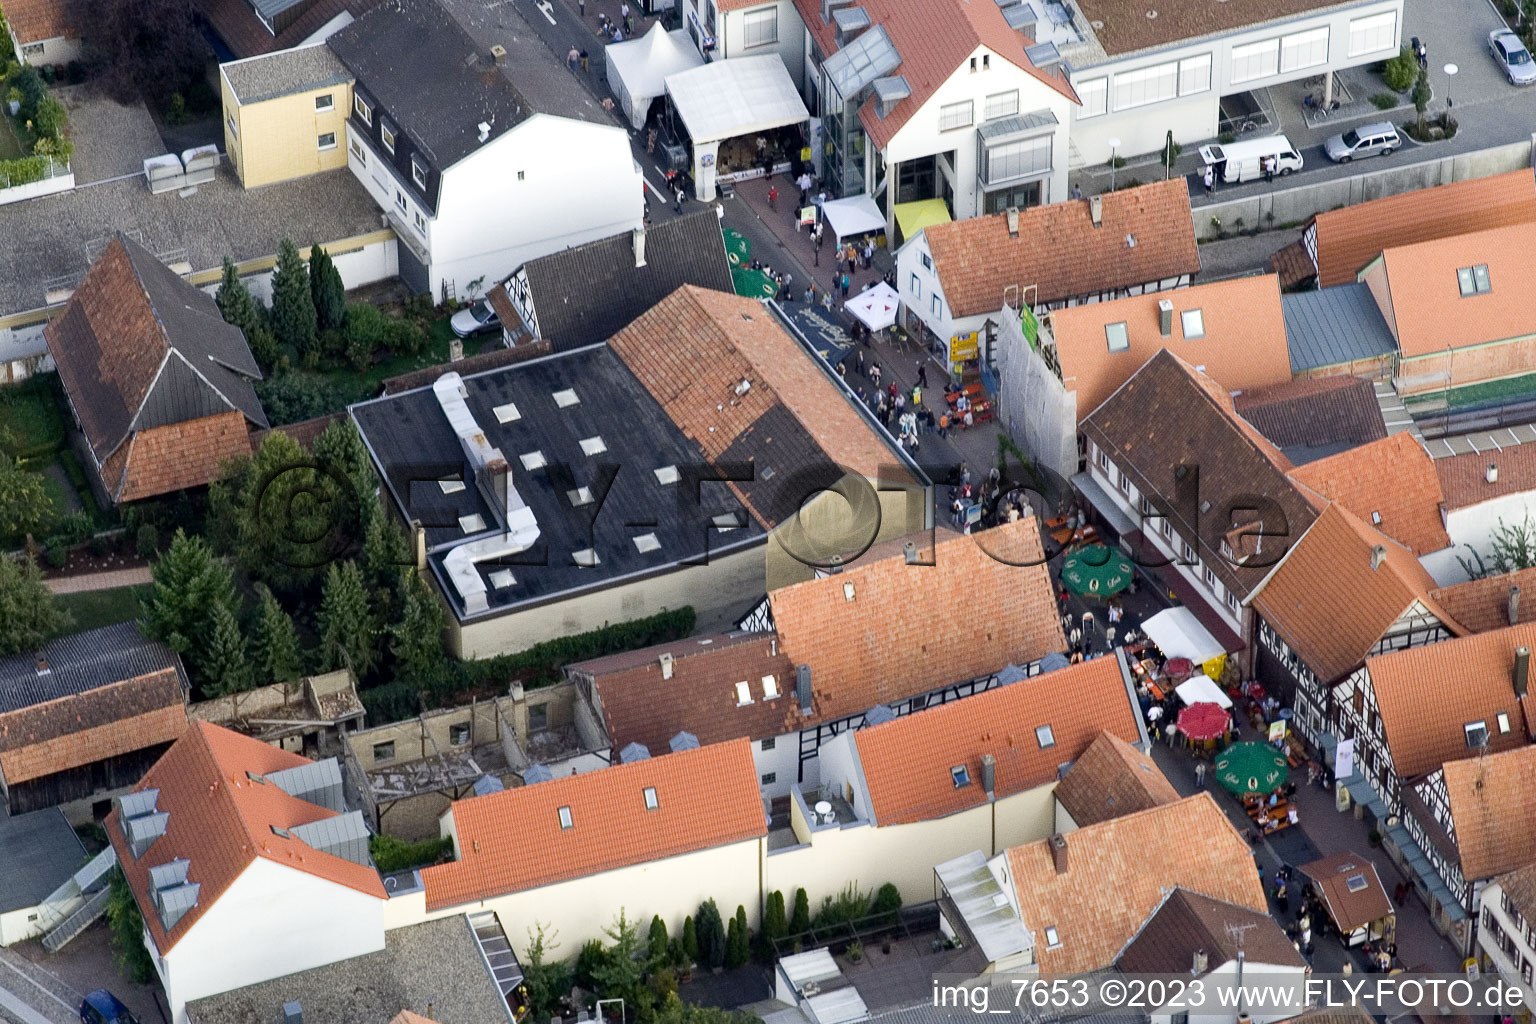 City festival, Hauptstr in Kandel in the state Rhineland-Palatinate, Germany